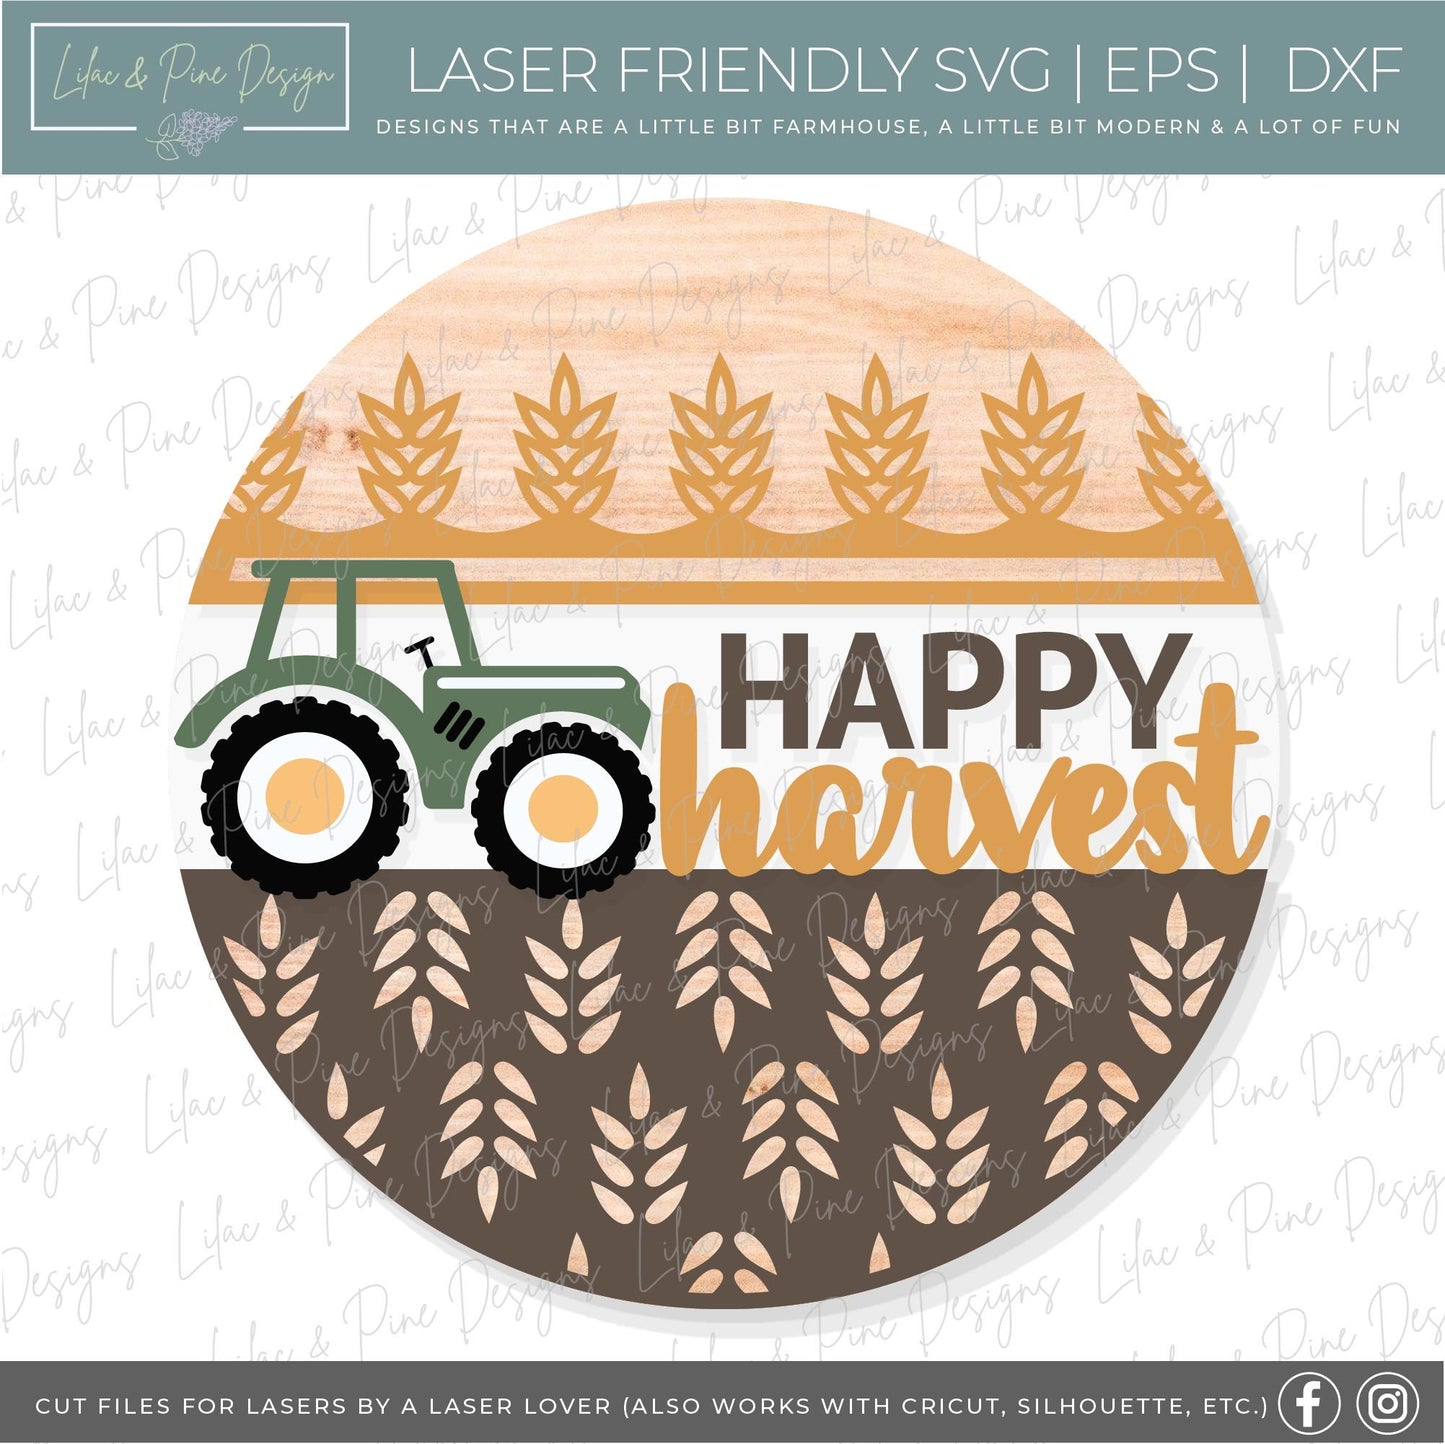 Happy Harvest door hanger SVG, Fall welcome sign SVG, Tractor round door hanger, Fall porch decor, Fall farmhouse sign, Glowforge laser SVG